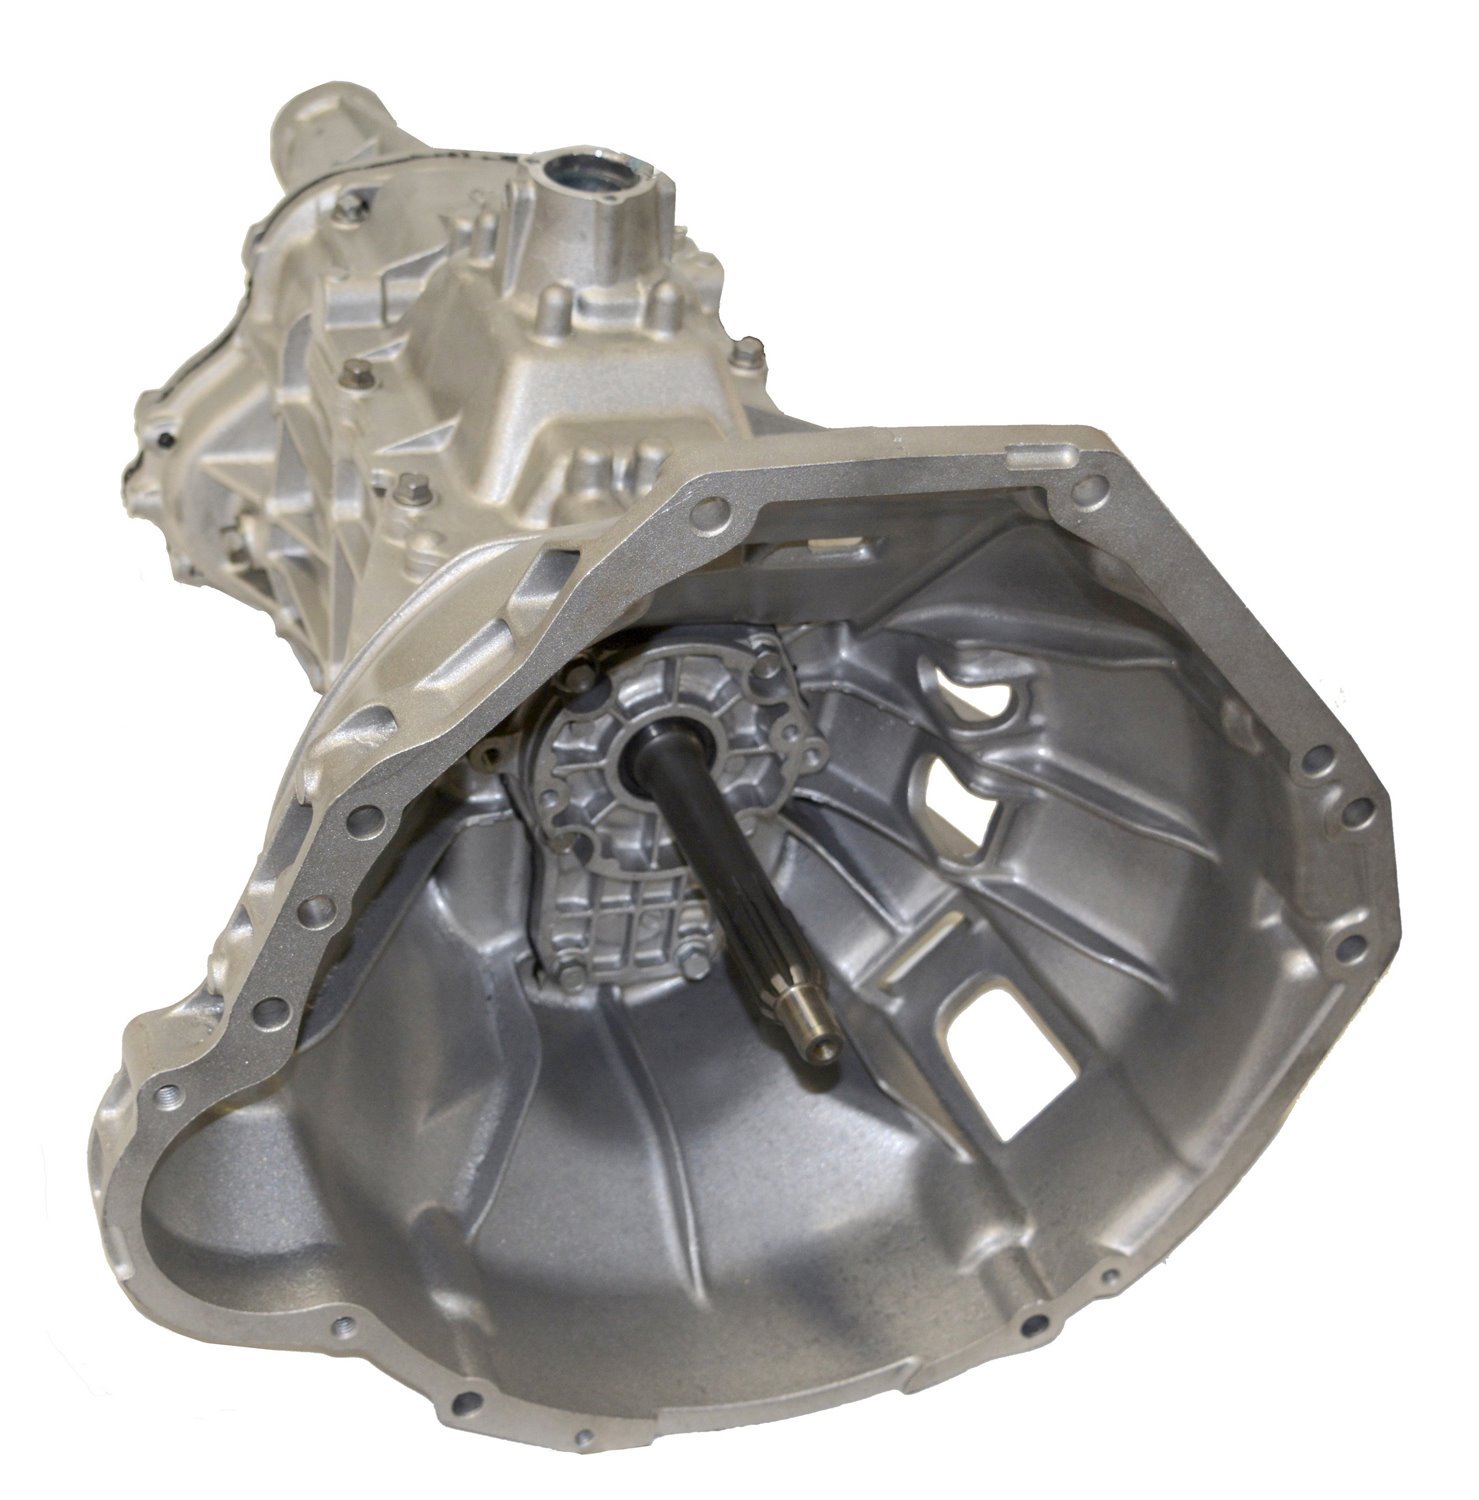 Remanufactured Manual Transmission for Ford 92-96 F150 & F250, 5 Speed